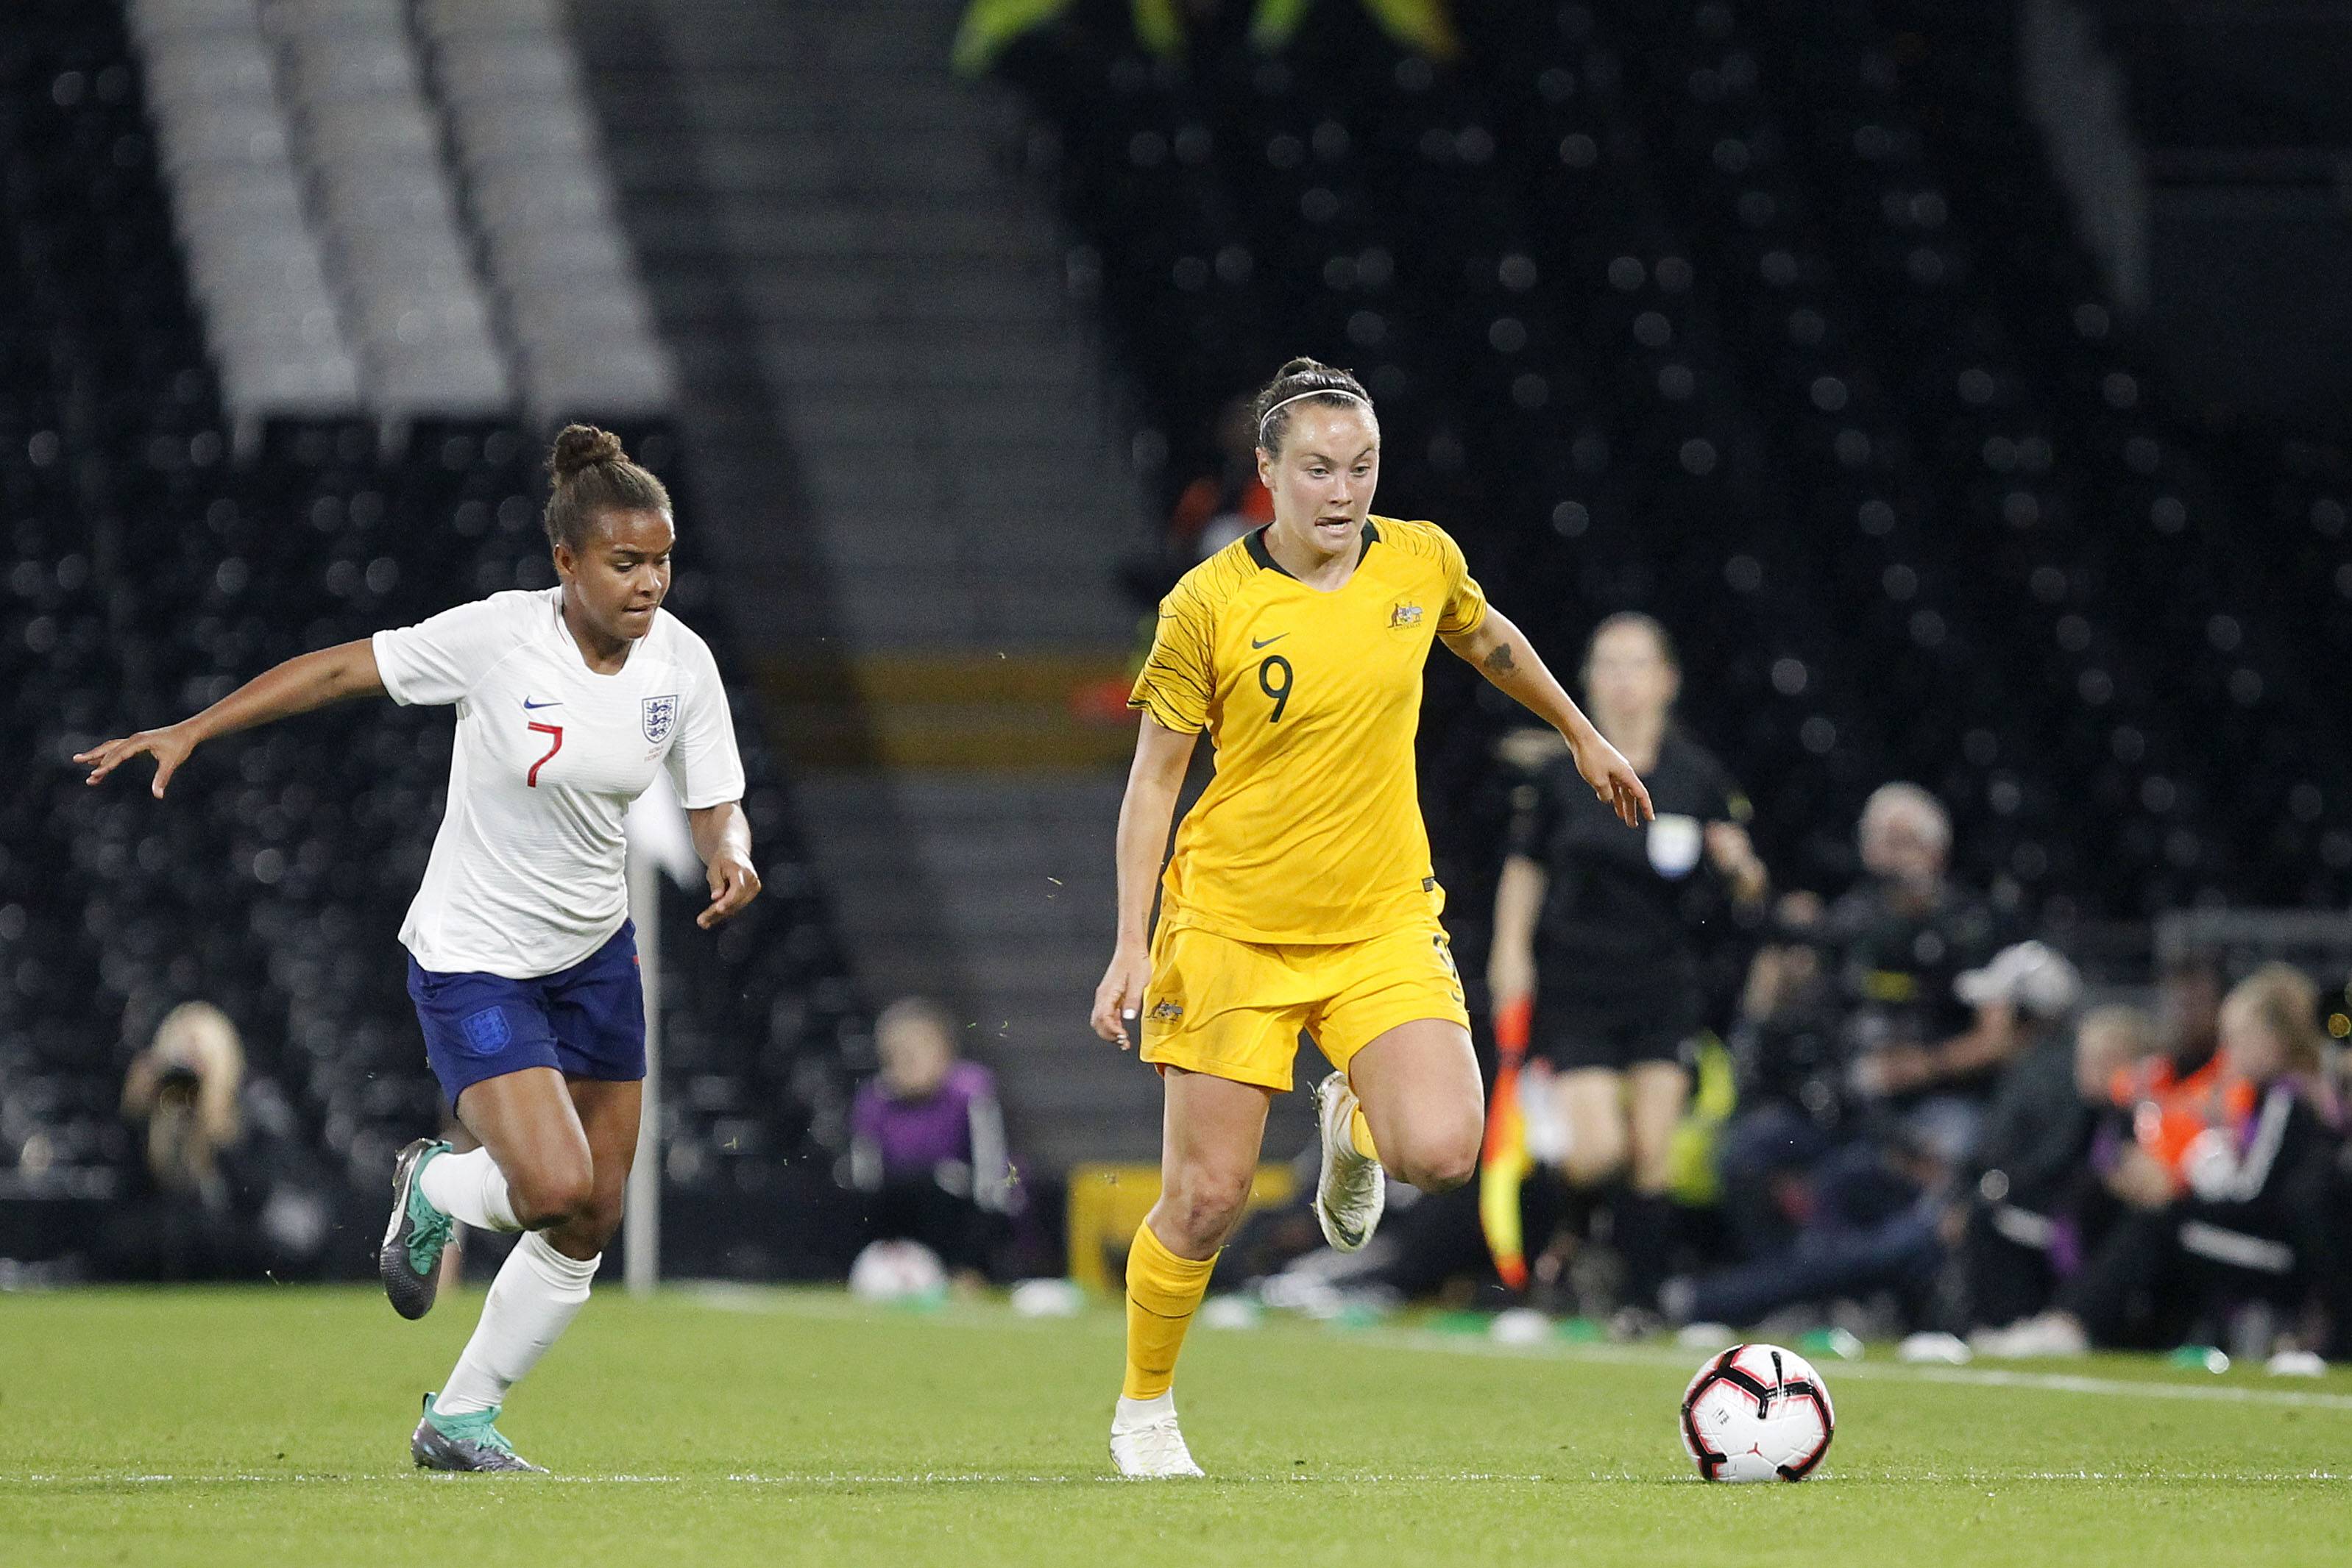 Nikita Parris of England and Caitlin Foord of Australia during the International Friendly between England Women and Australia Women at Craven Cottage on October 9, 2018 in London, England. (Photo by Catherine Ivill/Getty Images)